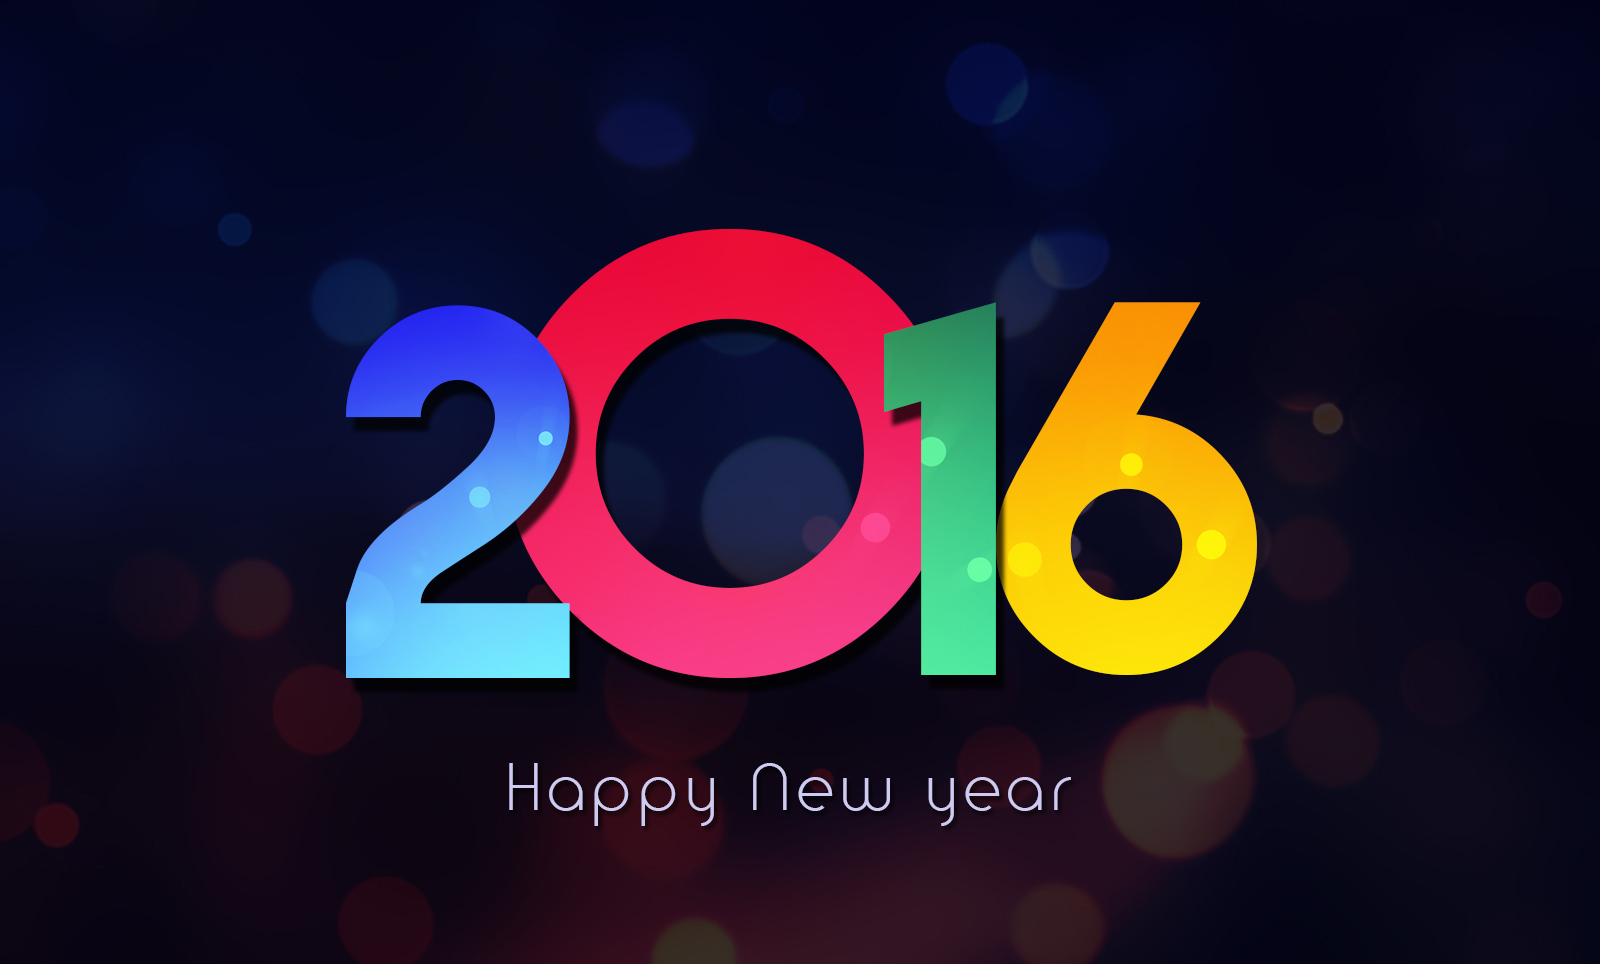 Happy New Year 2016 Background HD Images   Happy New Year 2016 Quotes